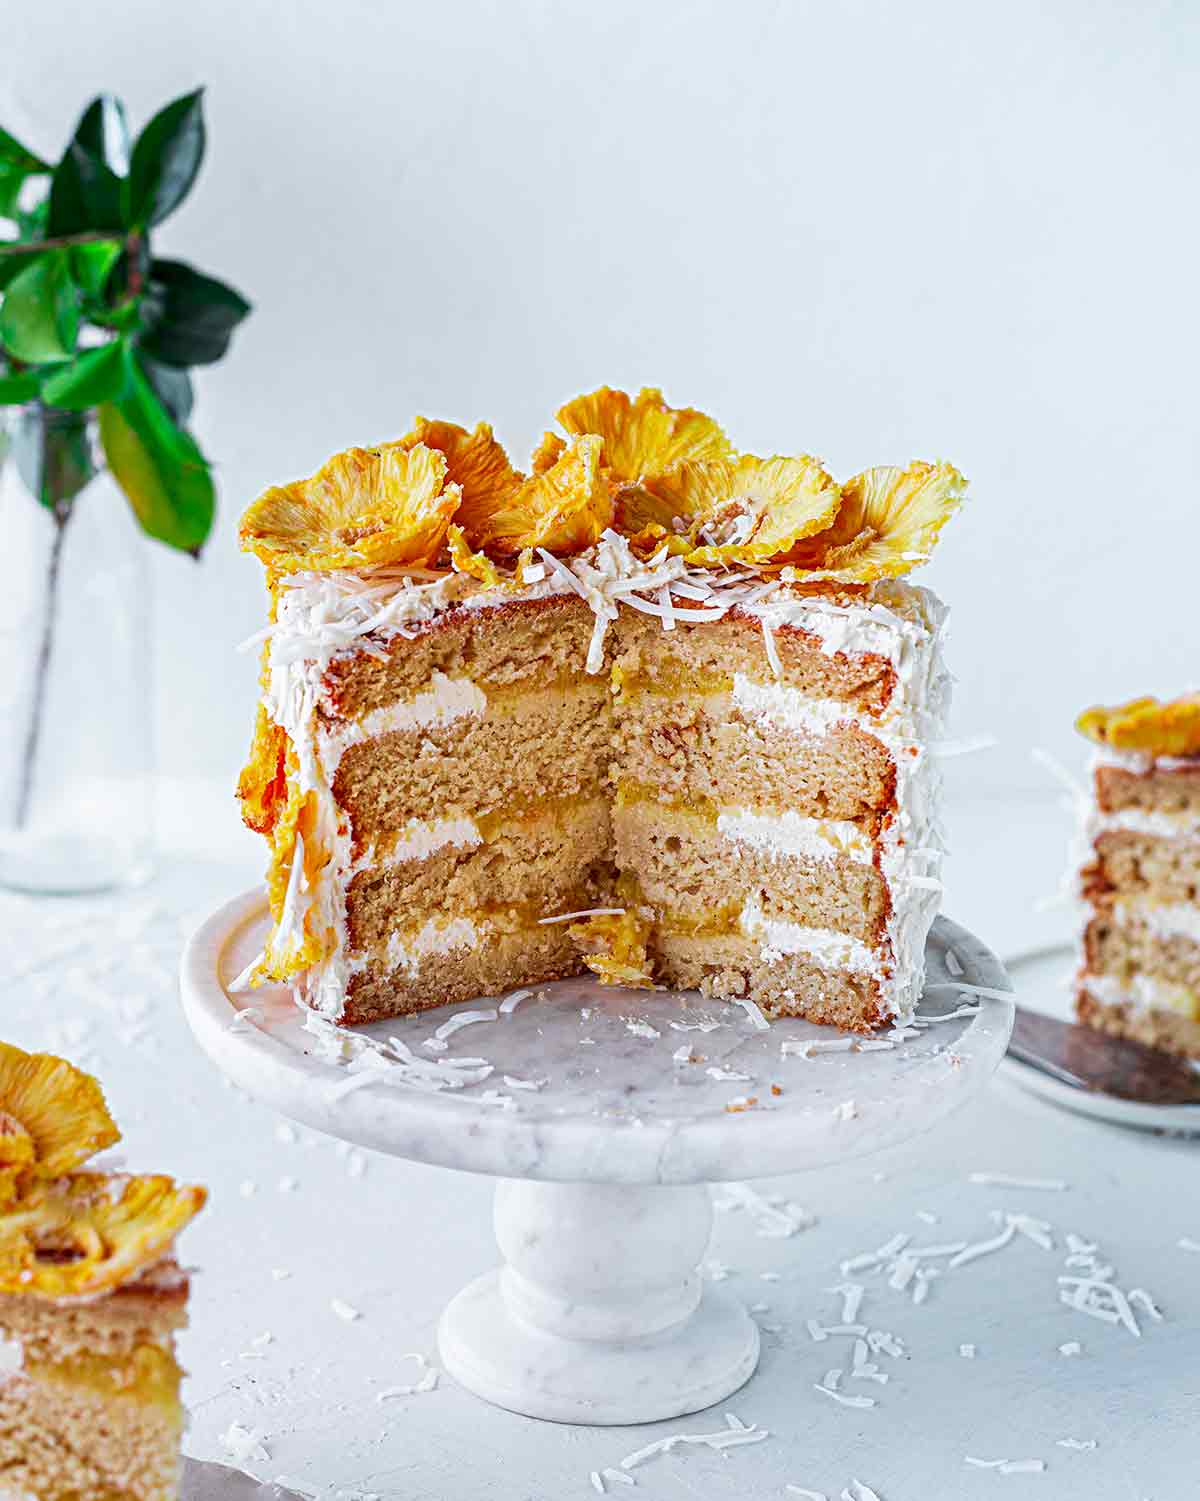 Cross section of whole vegan pina colada cake showing multiple layers of cake, pineapple puree, frosting and dried pineapple on top.